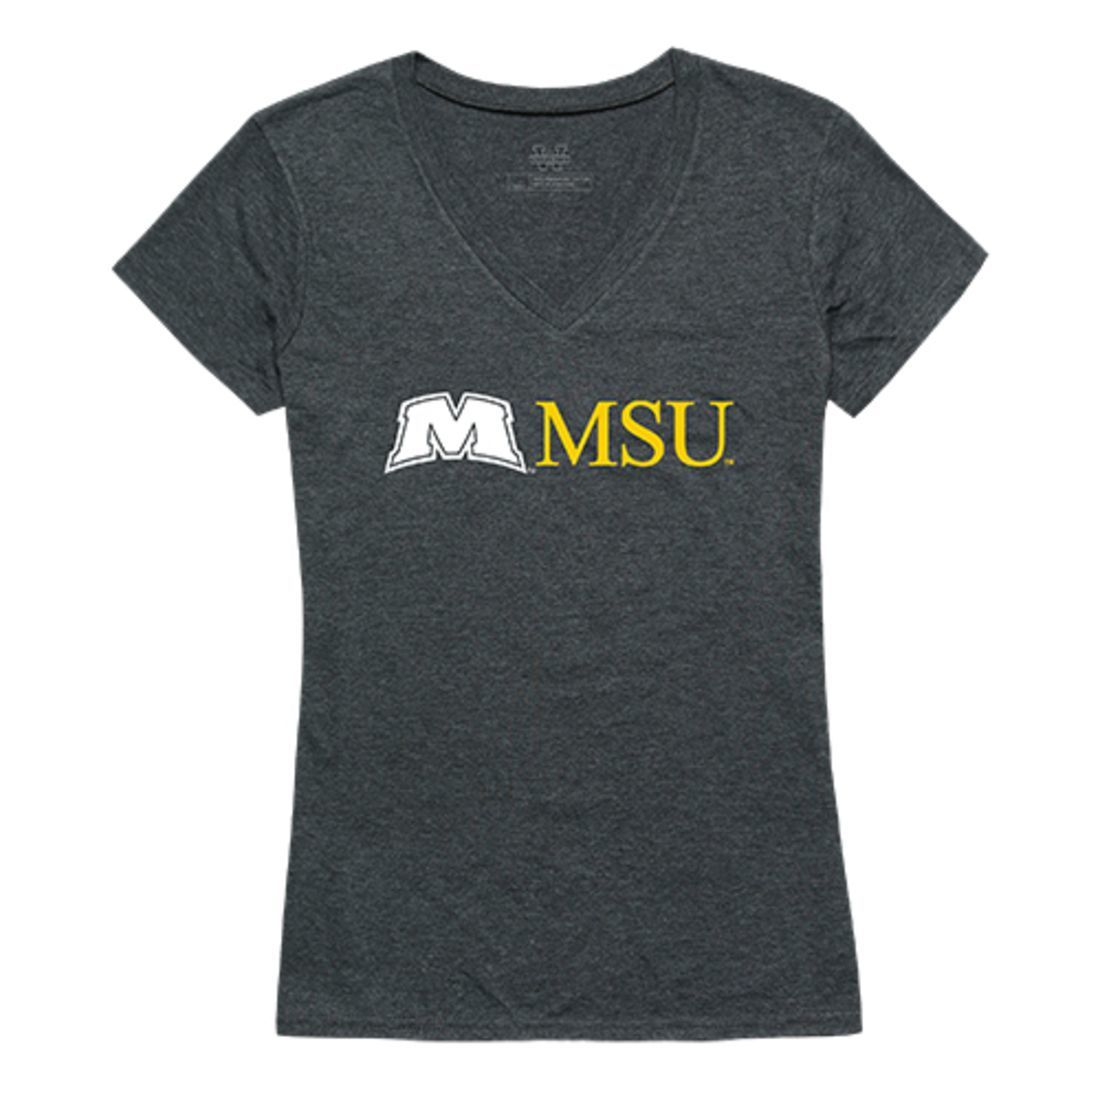 Morehead State University MSU Eagles Womens Institutional Tee T-Shirt Heather Charcoal-Campus-Wardrobe